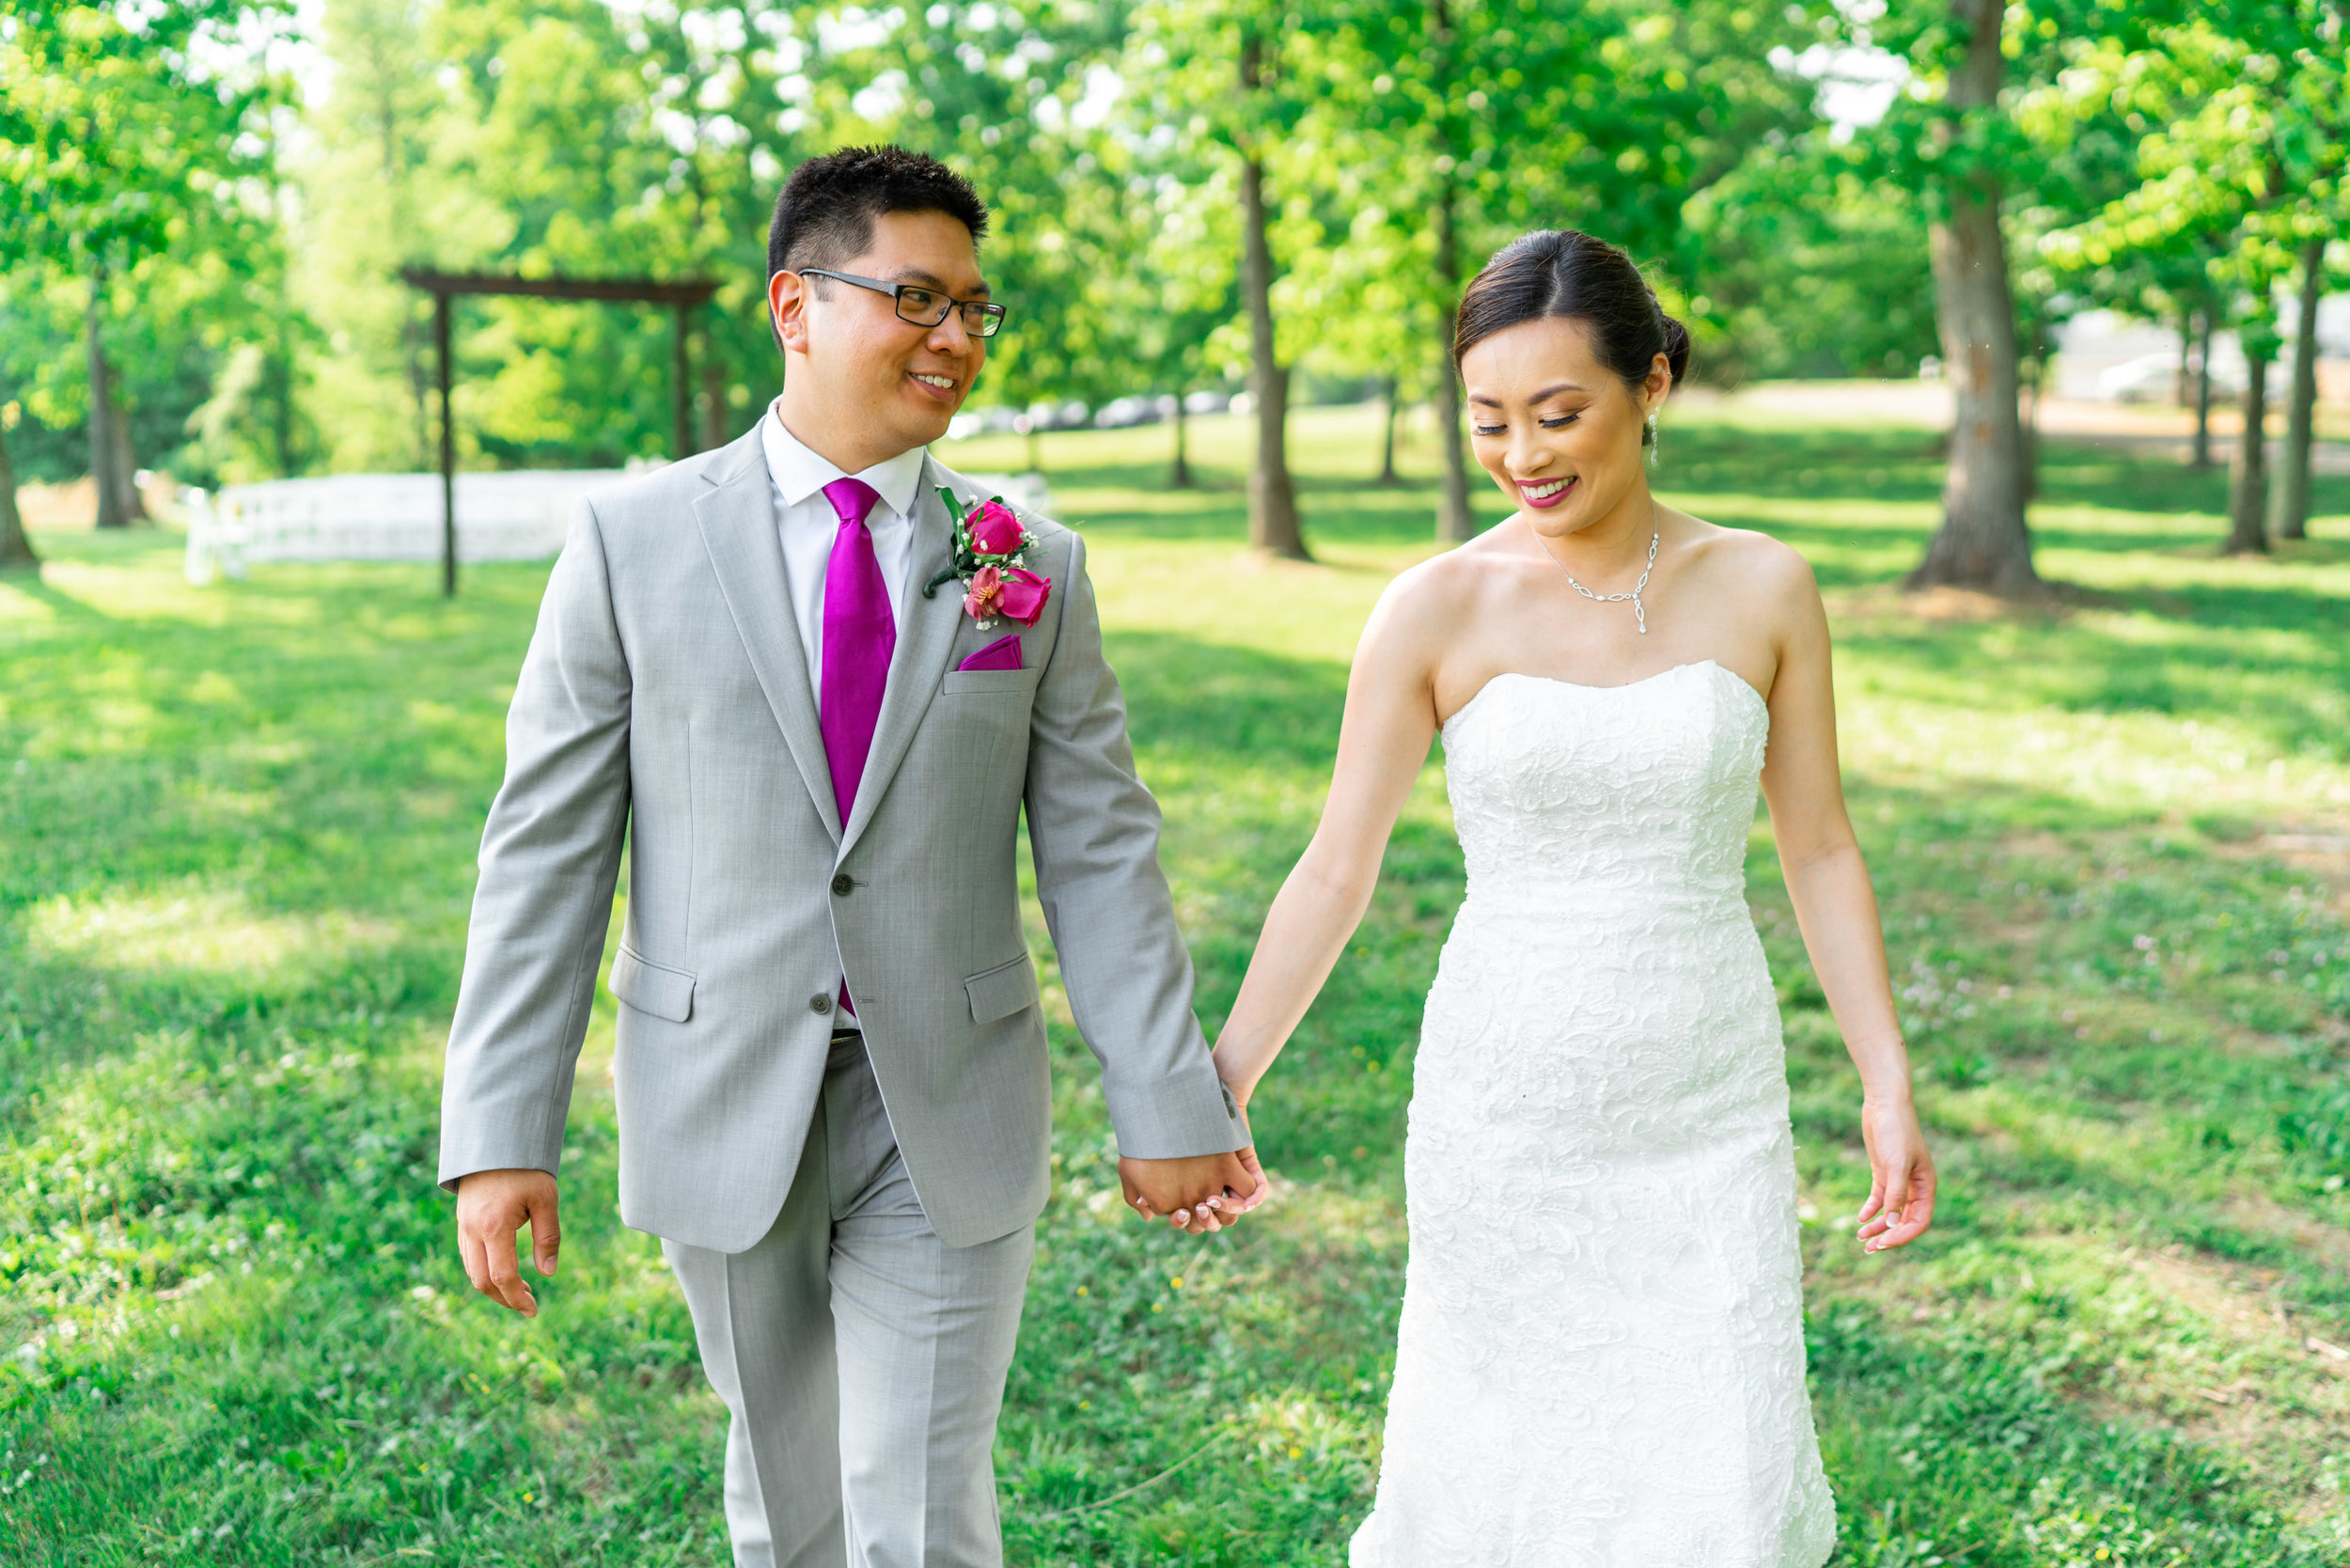 Bride and groom walking and holding hands smiling